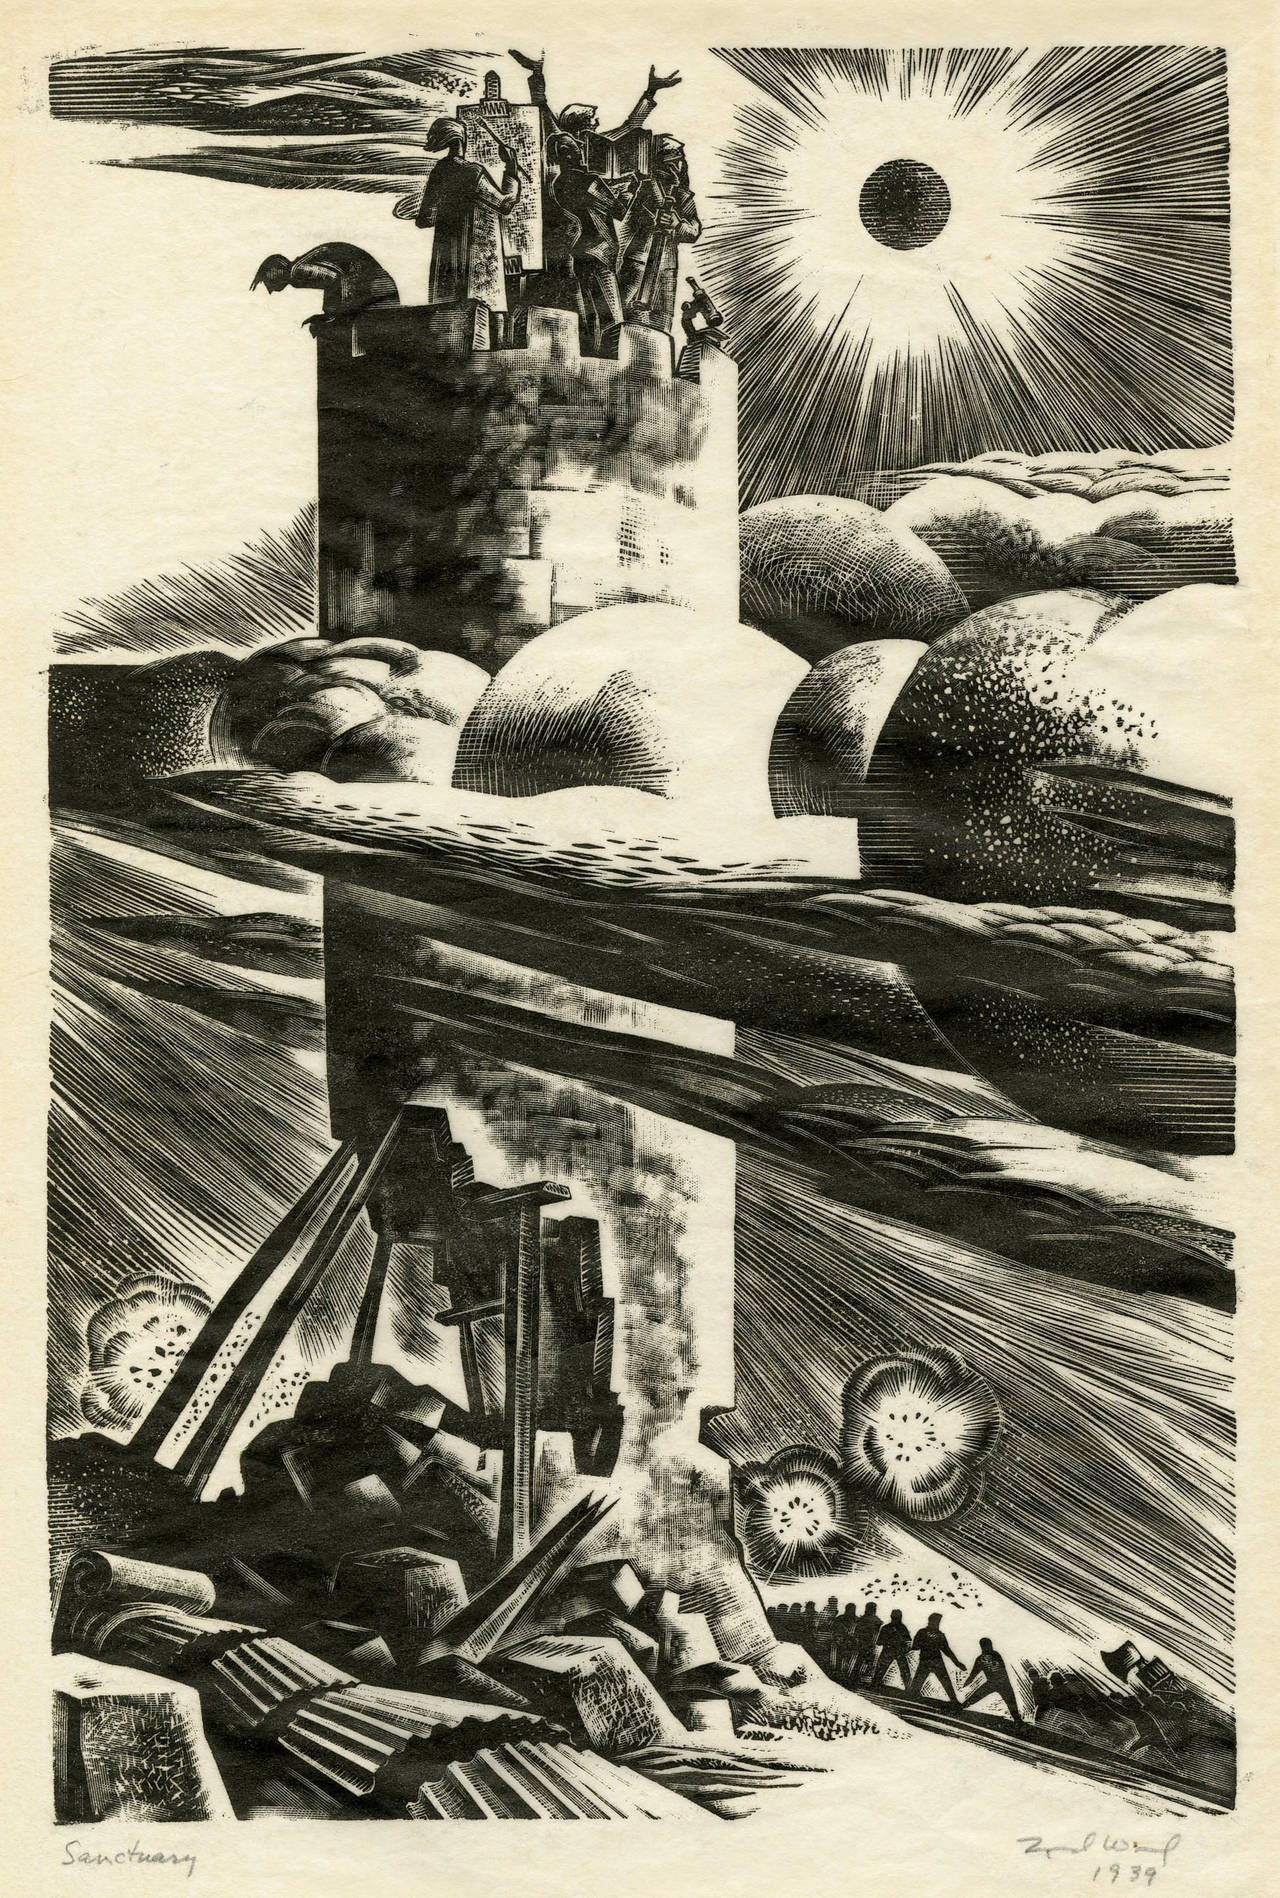 Lynd Ward Landscape Print - Sanctuary, The ivory tower above the fray. An artist is one of the residents.